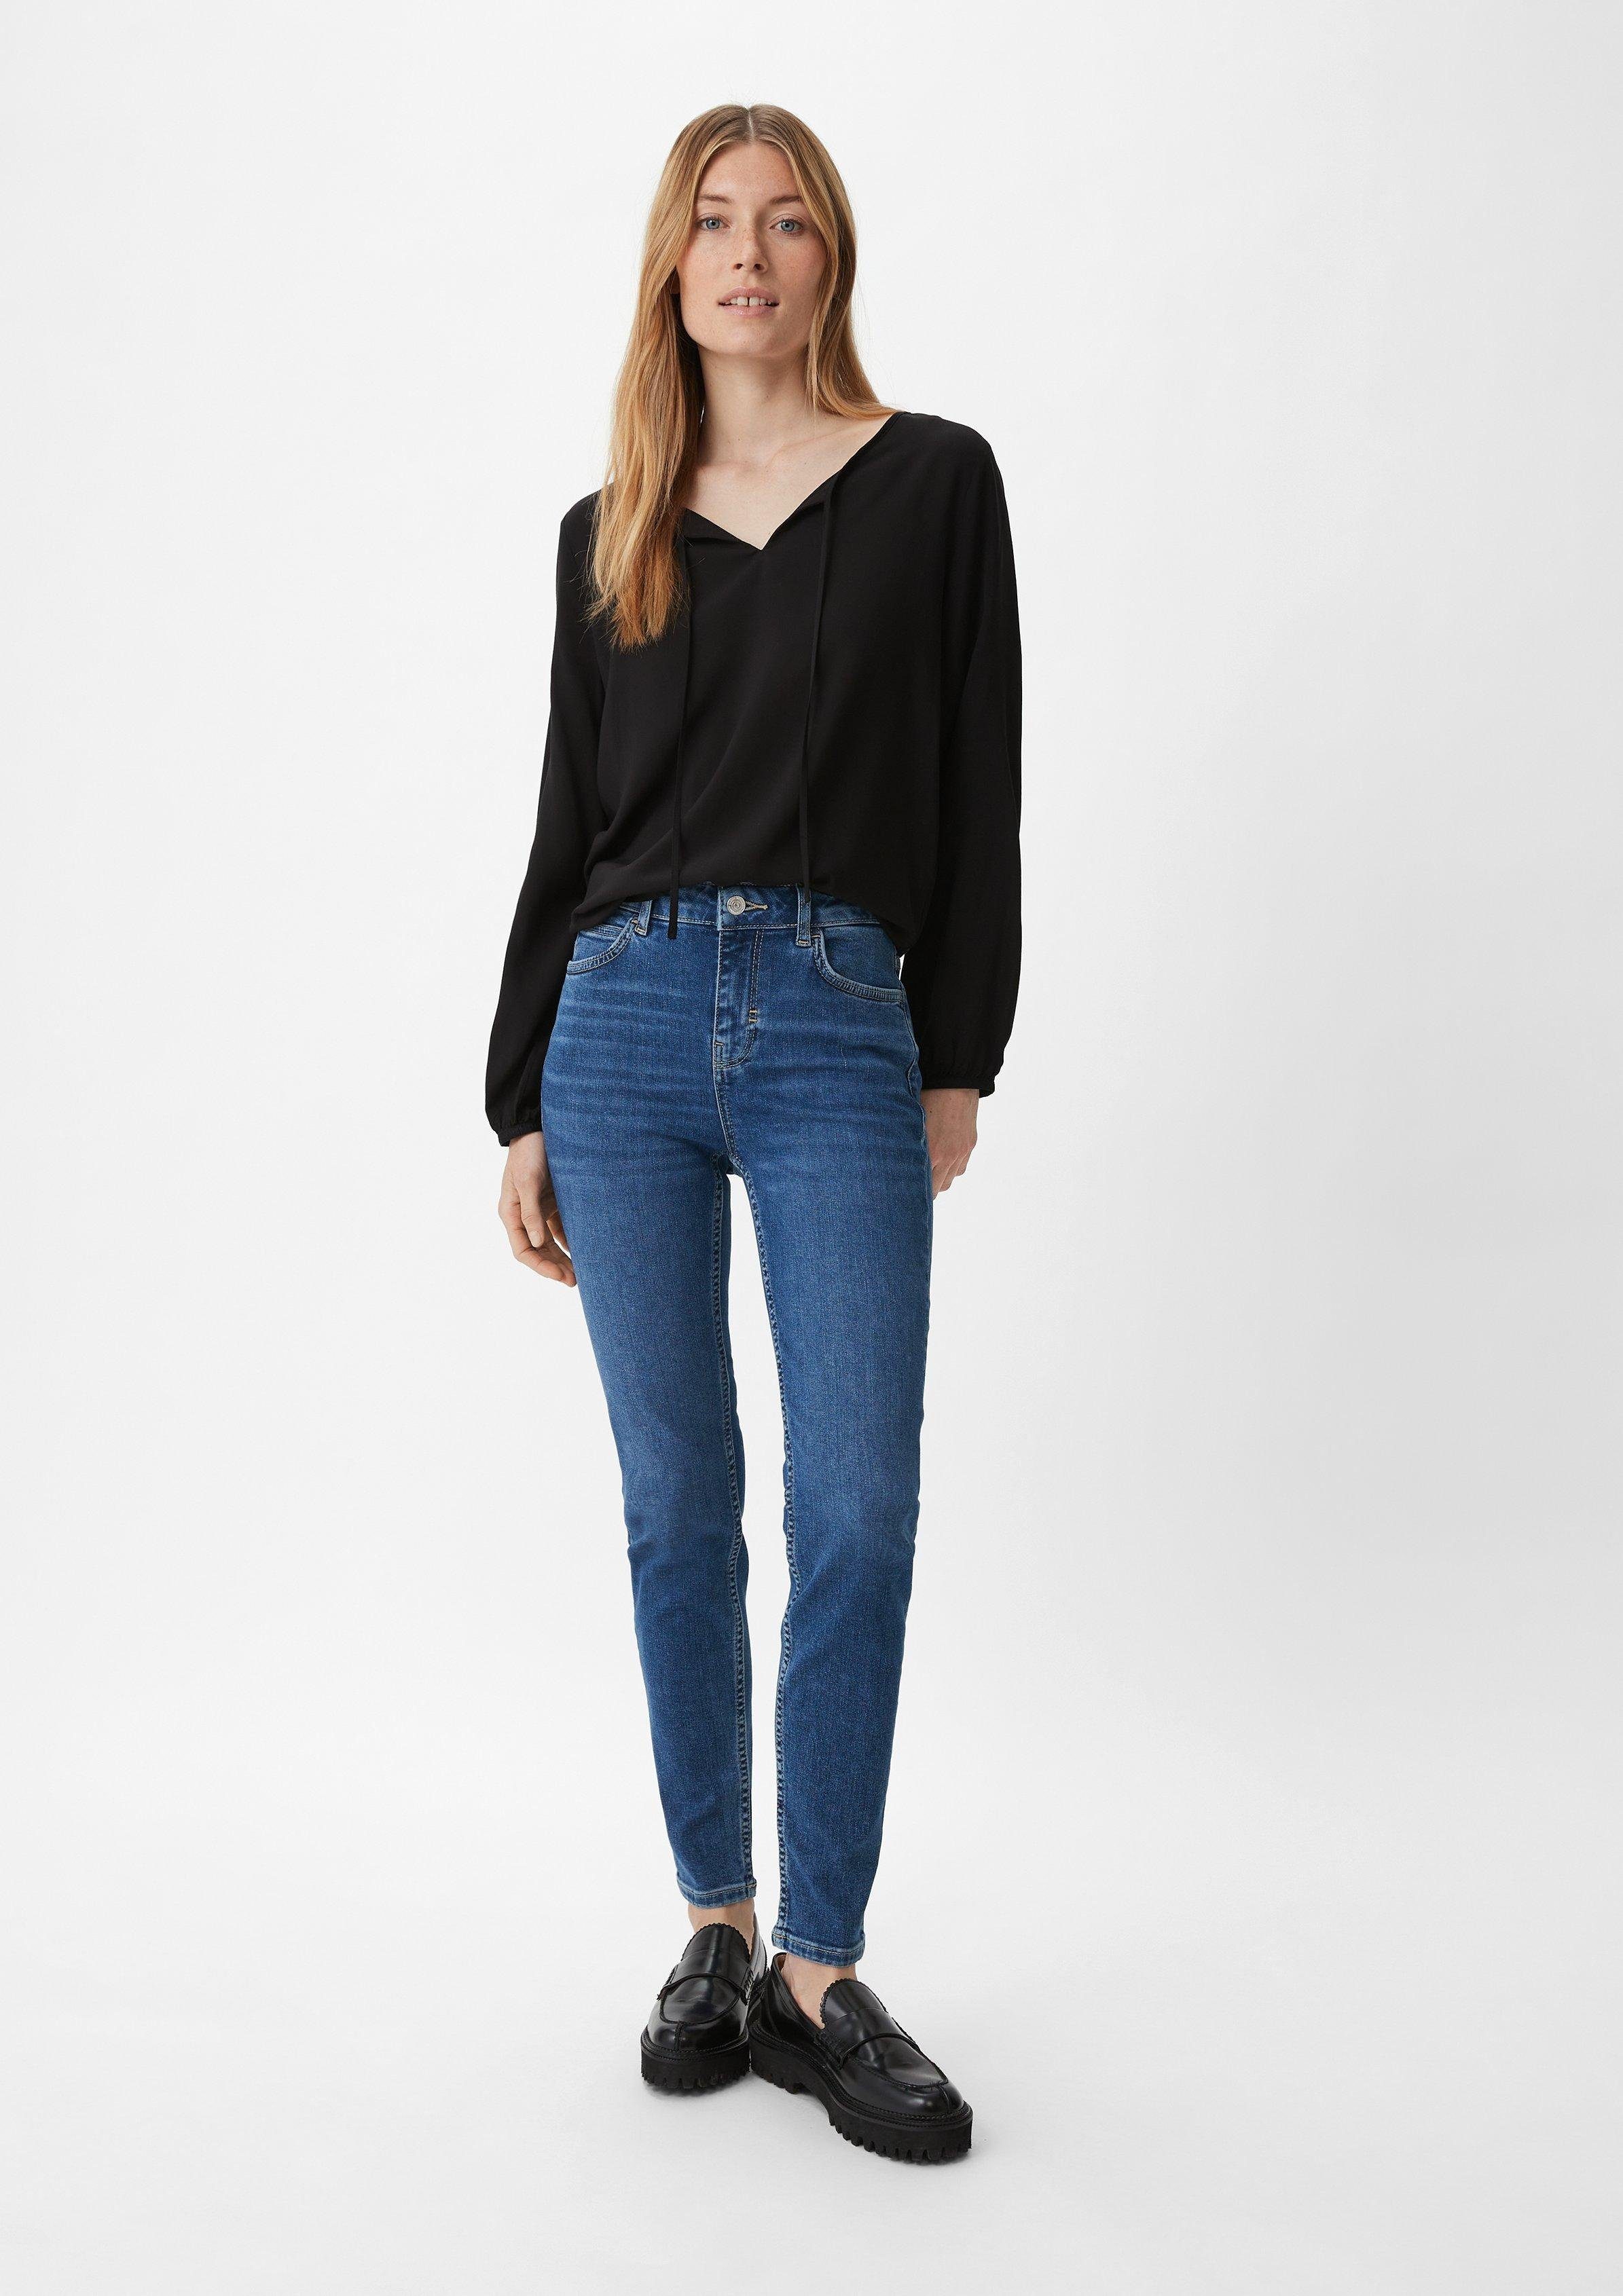 5-Pocket-Jeans mit Leder-Patch identity casual comma Skinny: Waschung, Waschung Jeans